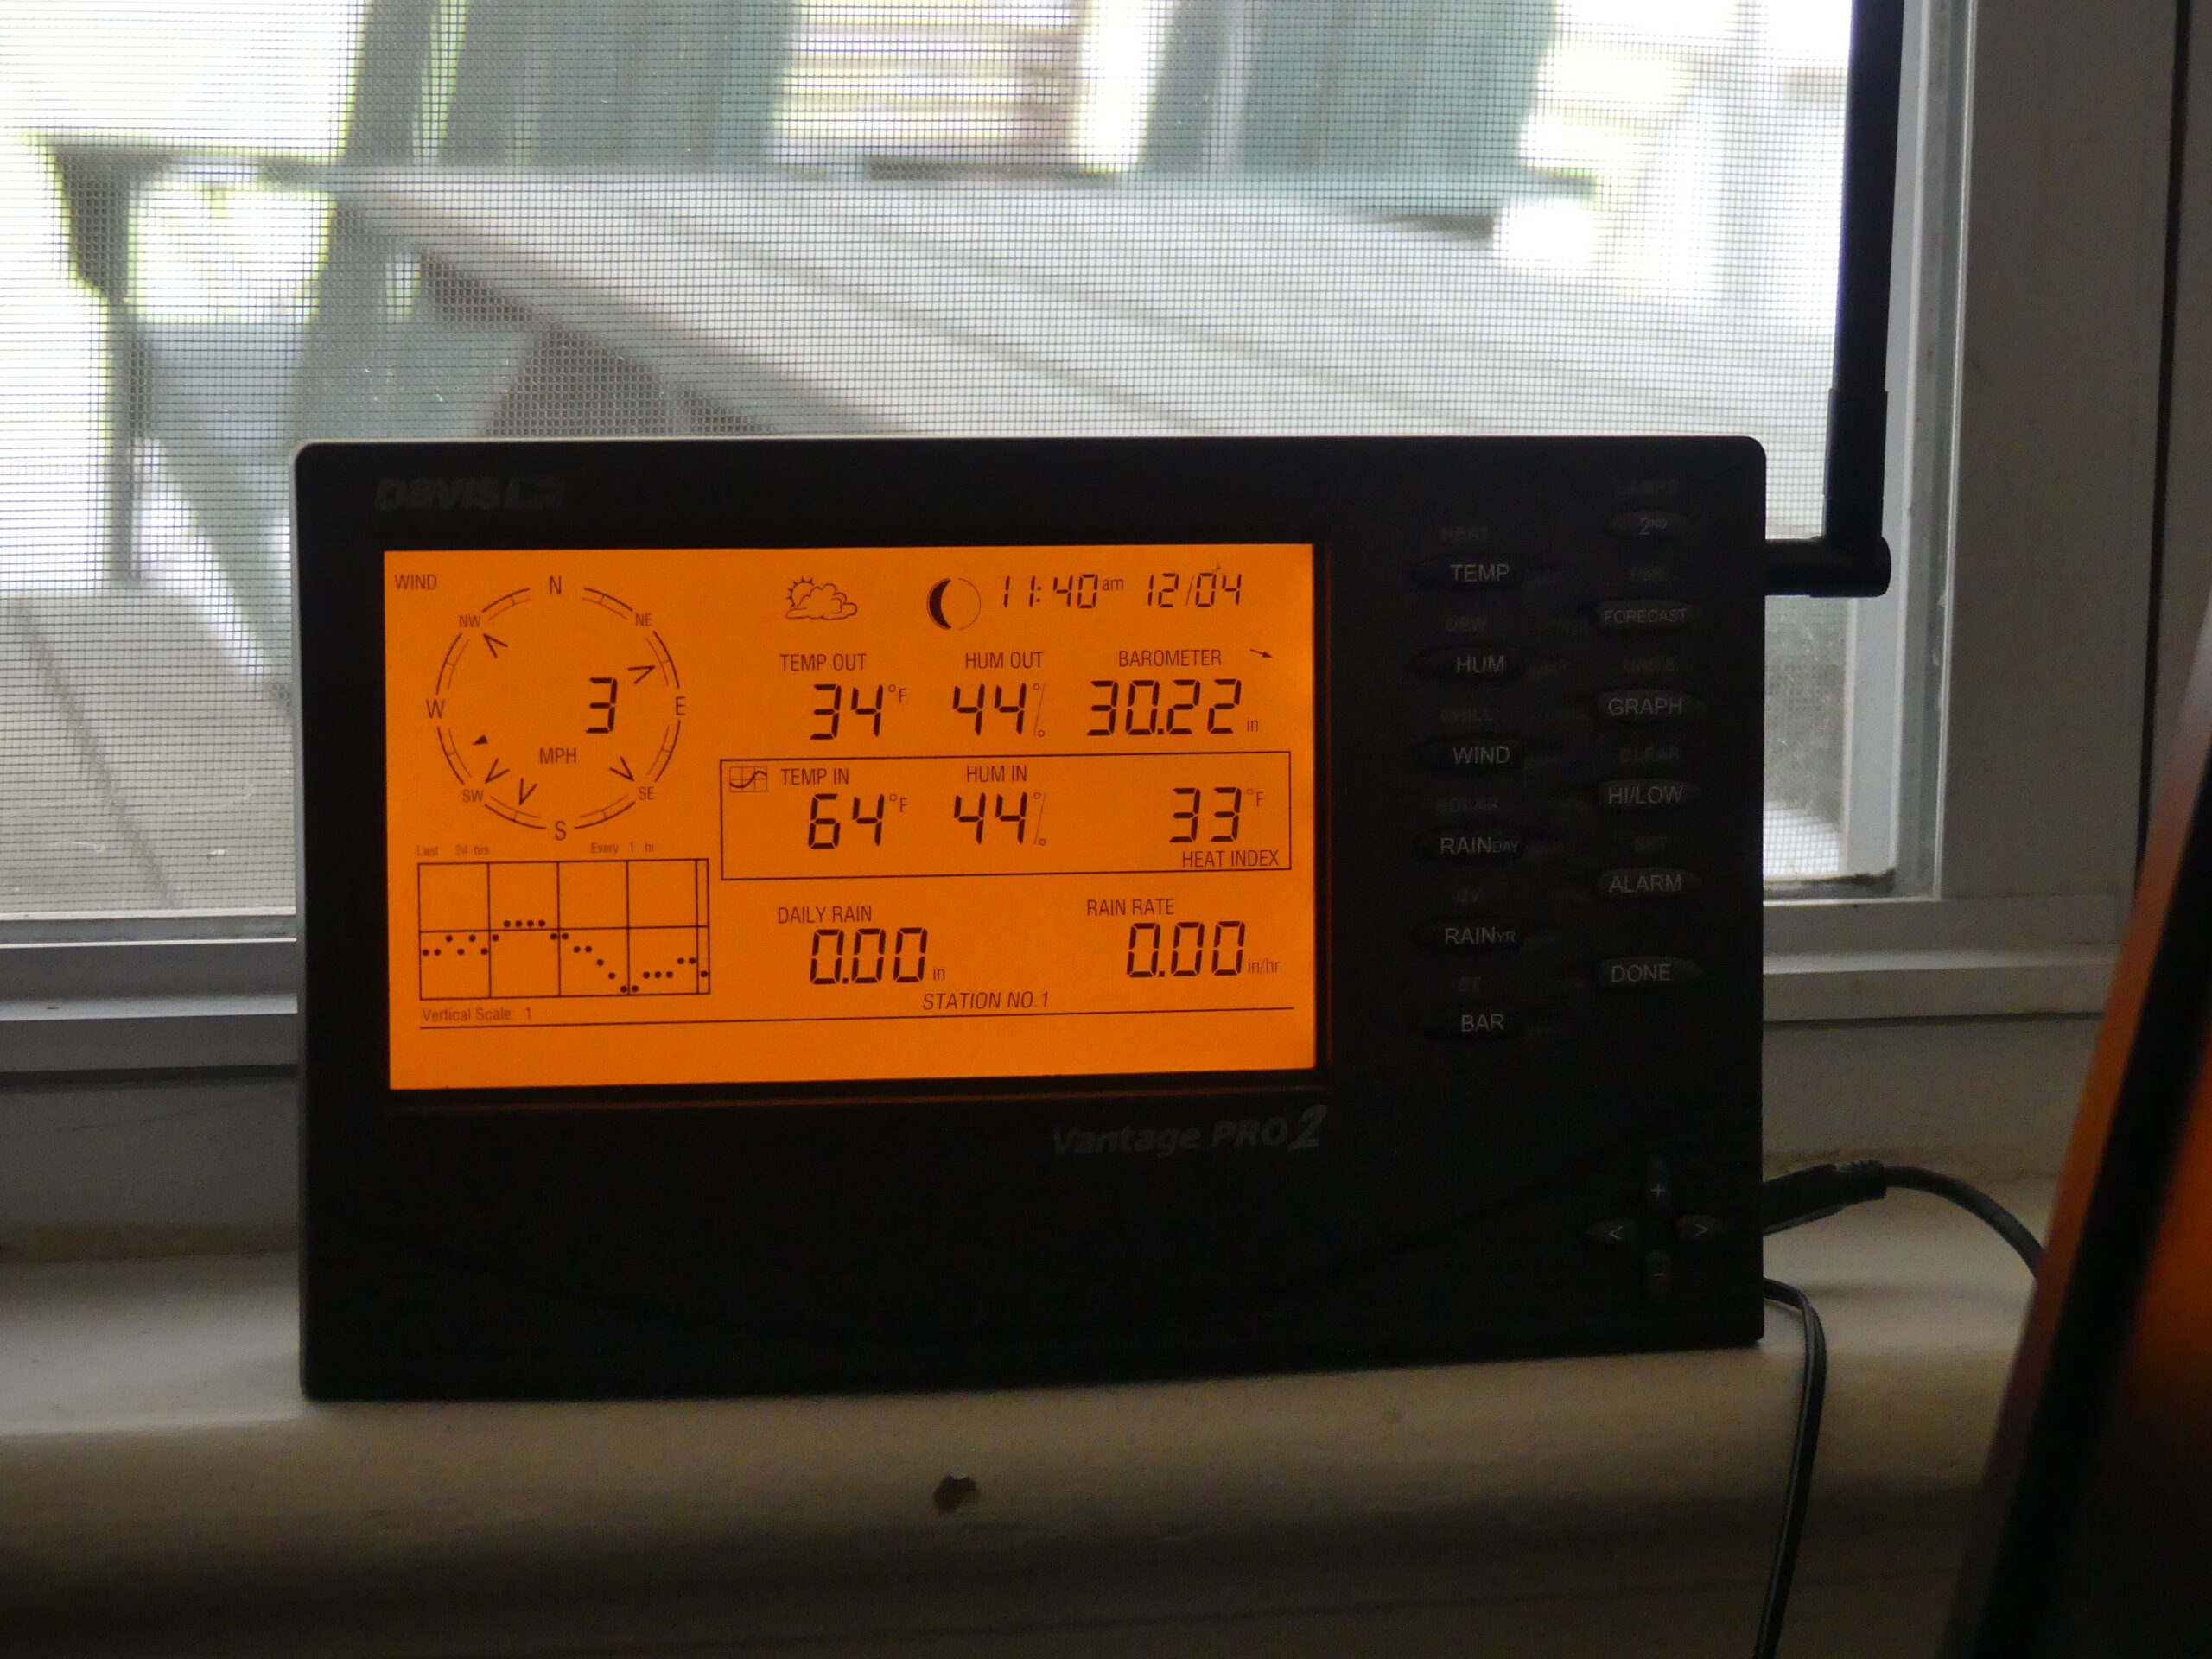 This is the display on the VP 2 console. It’s not as colorful or customizable as the WS 5000 display but it’s adequate. The console receives the signals from the station then can provide the data to a local computer or it can upload directly to a service like Weather Underground for archiving and public viewing. ANDREW MESSINGER